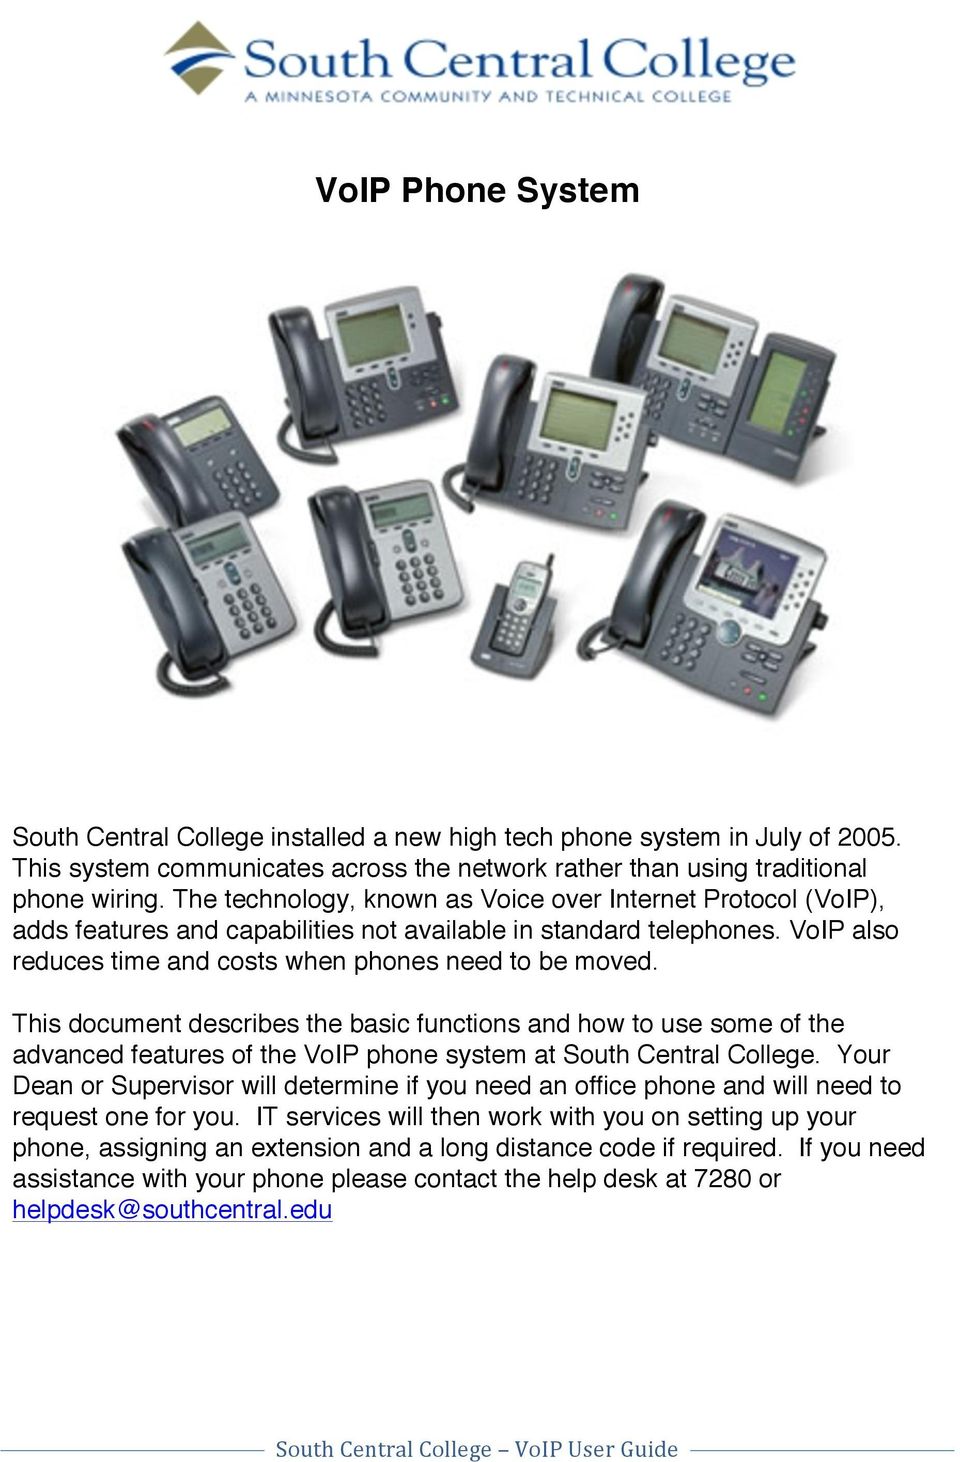 This document describes the basic functions and how to use some of the advanced features of the VoIP phone system at South Central College.